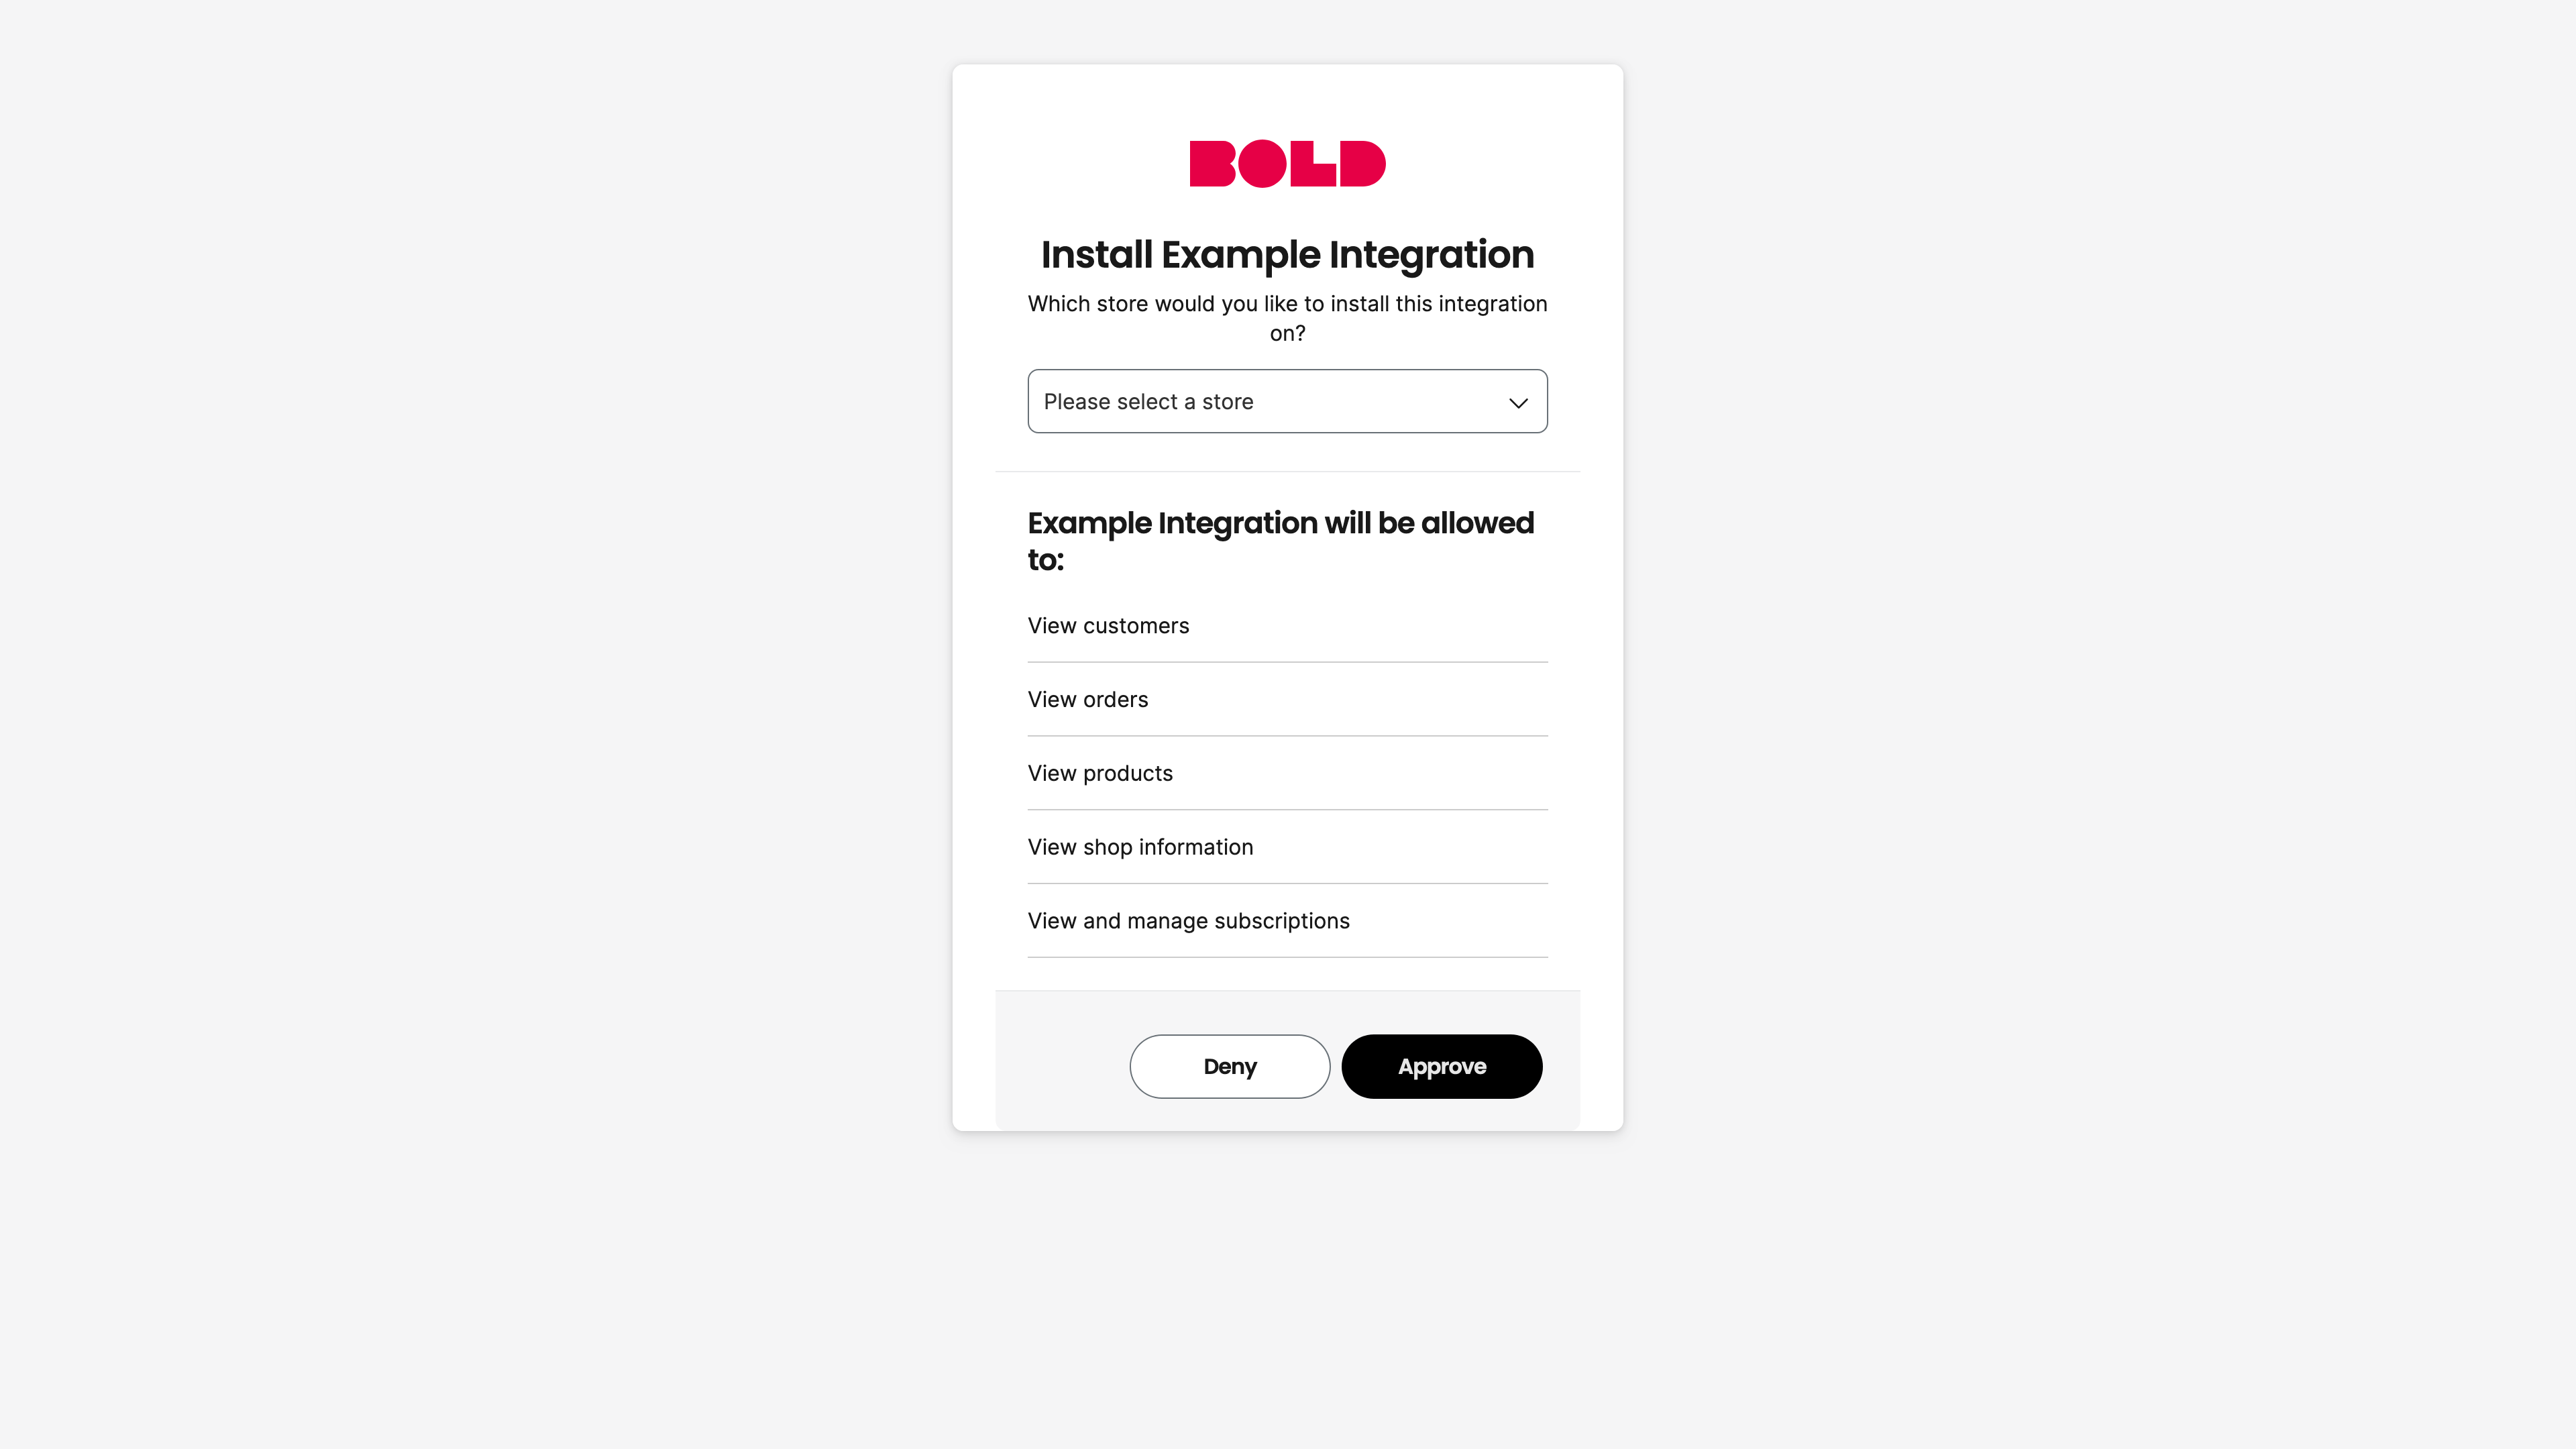 Screenshot of the integration install page.